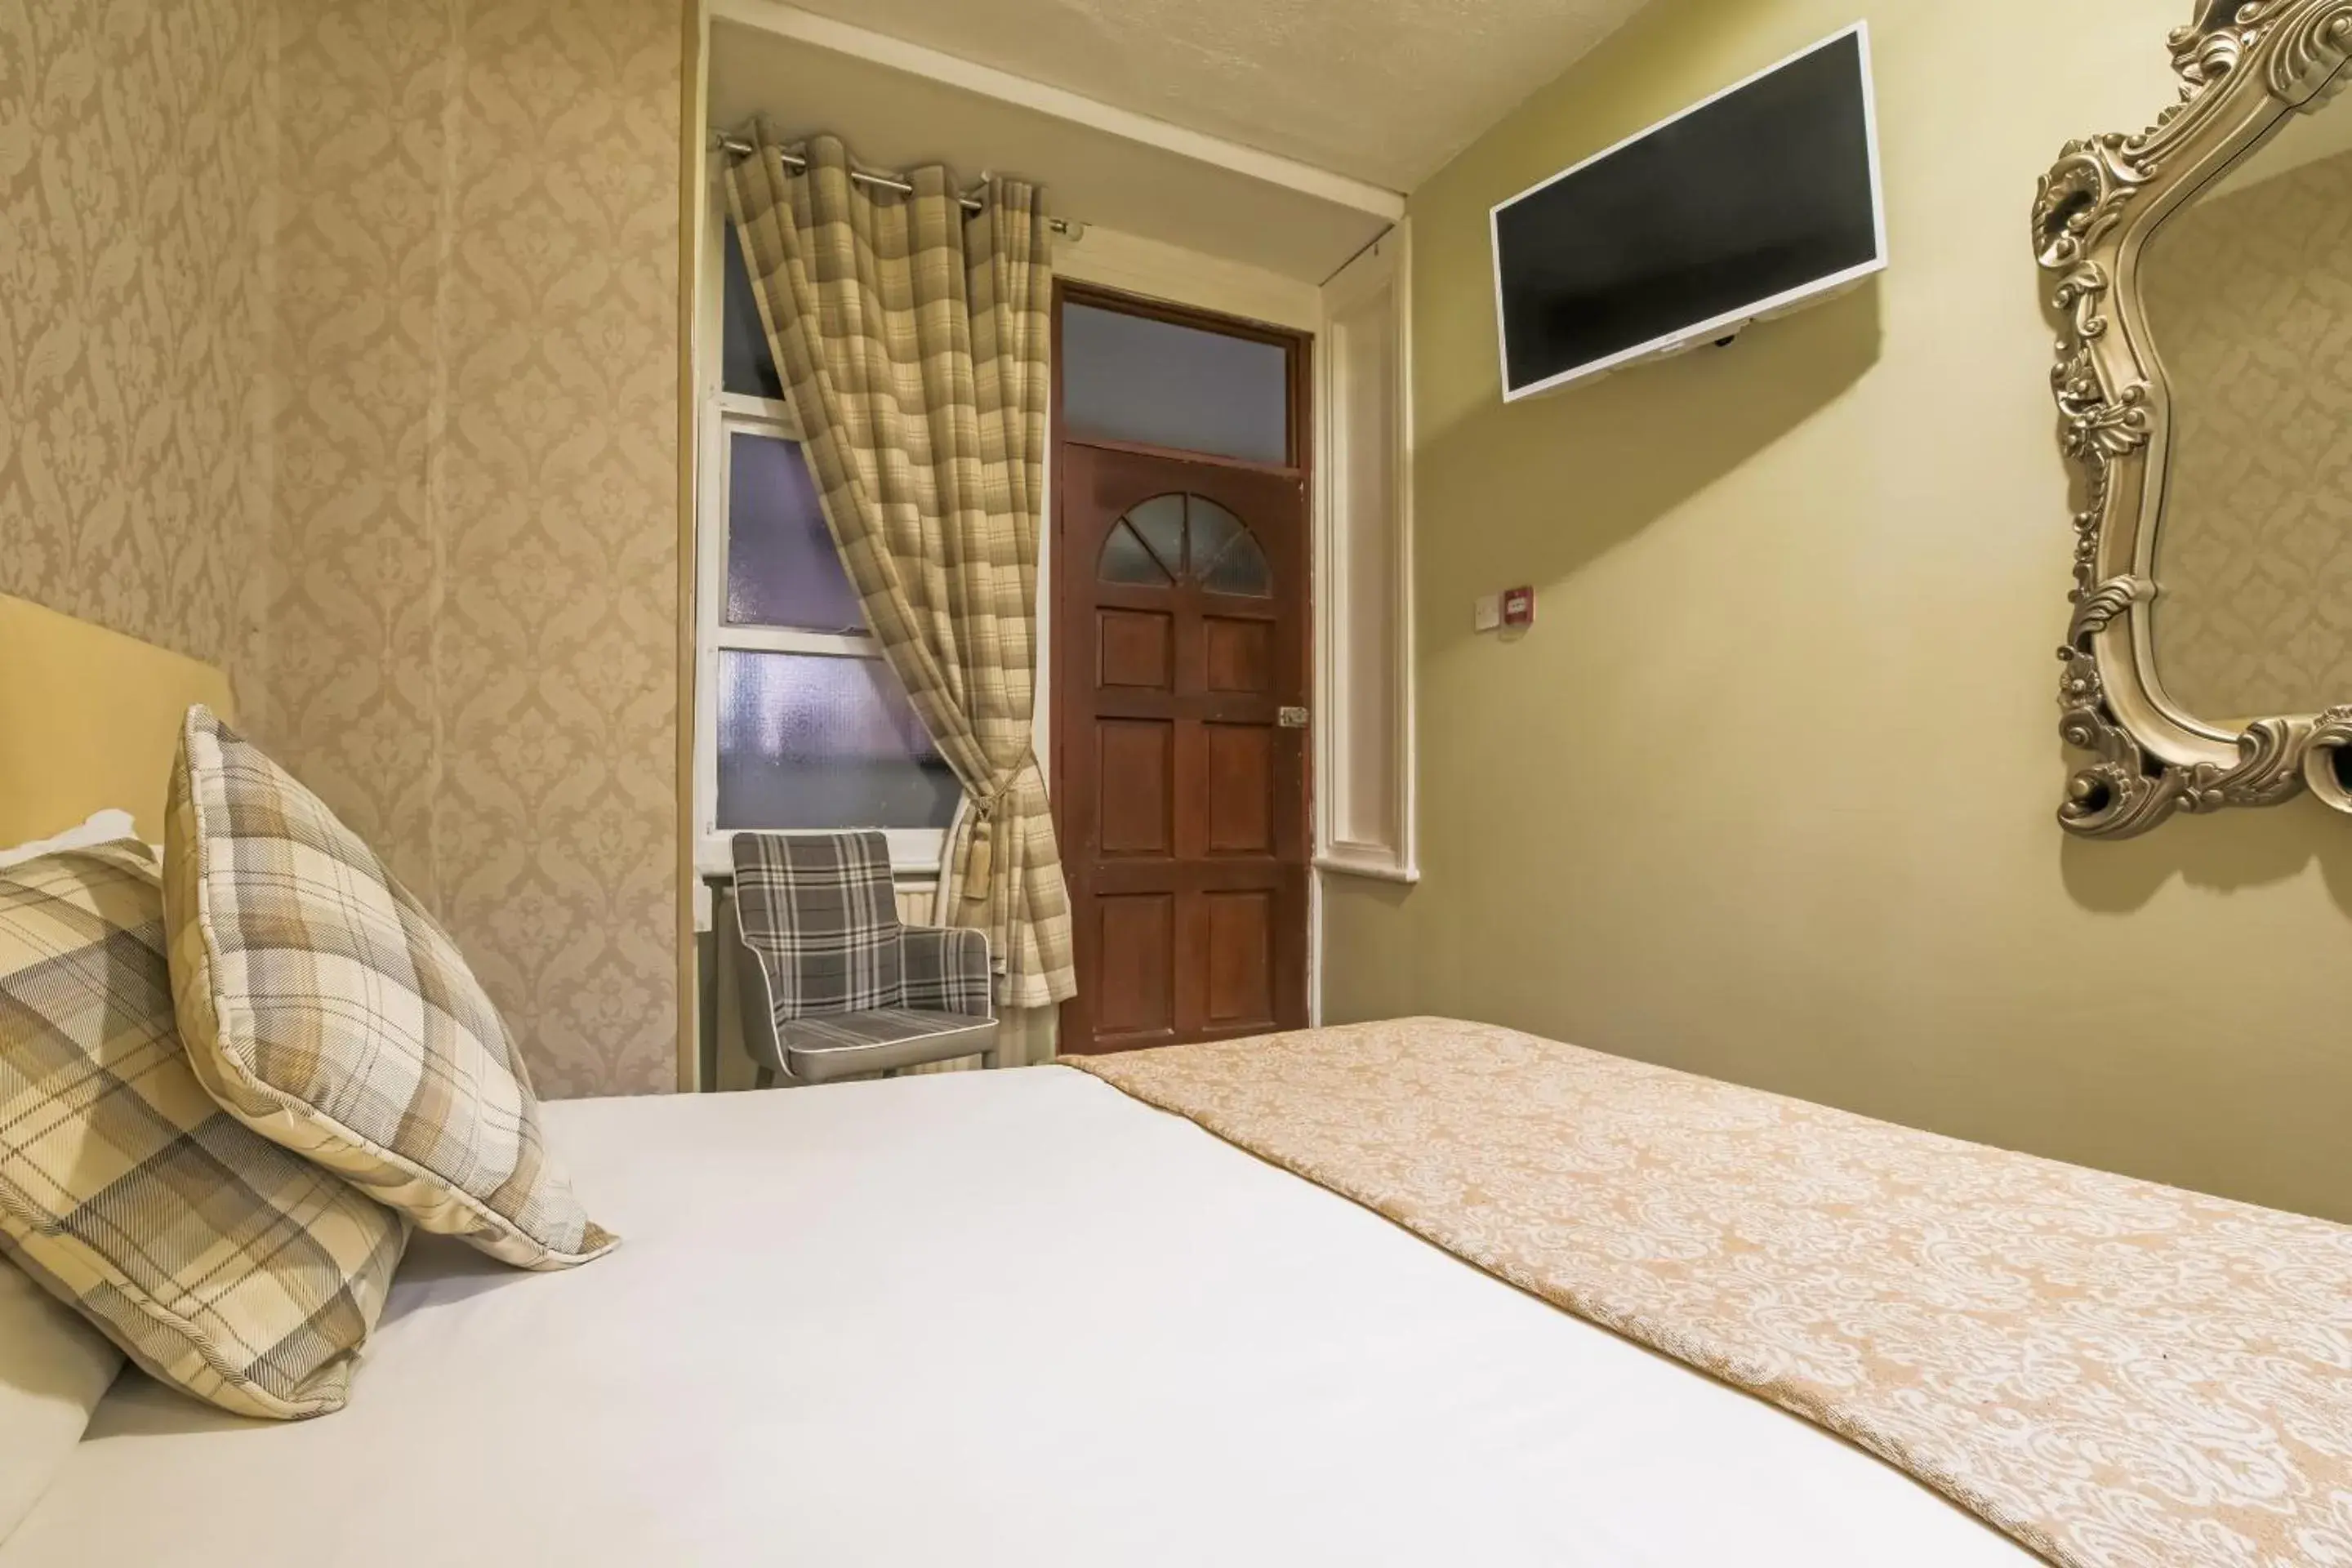 Bedroom, TV/Entertainment Center in OYO Hotel Mj Kingsway, Cleethorpes Seafront